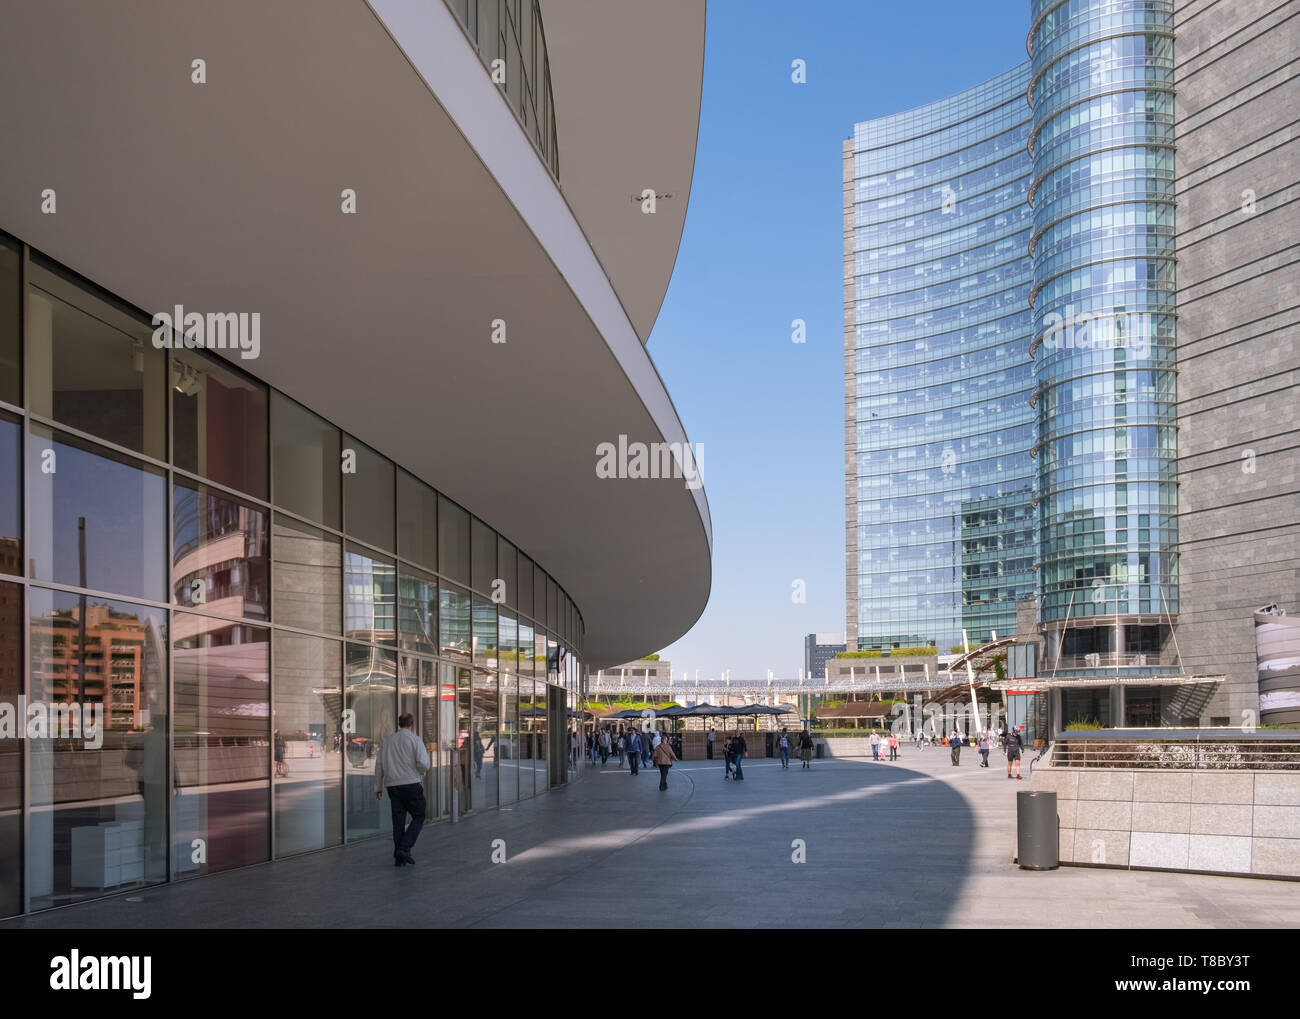 Piazza Gae Aulenti, part of Milan's Porta Nuova regeneration project, featuring modern architecture and shopping. Stock Photo